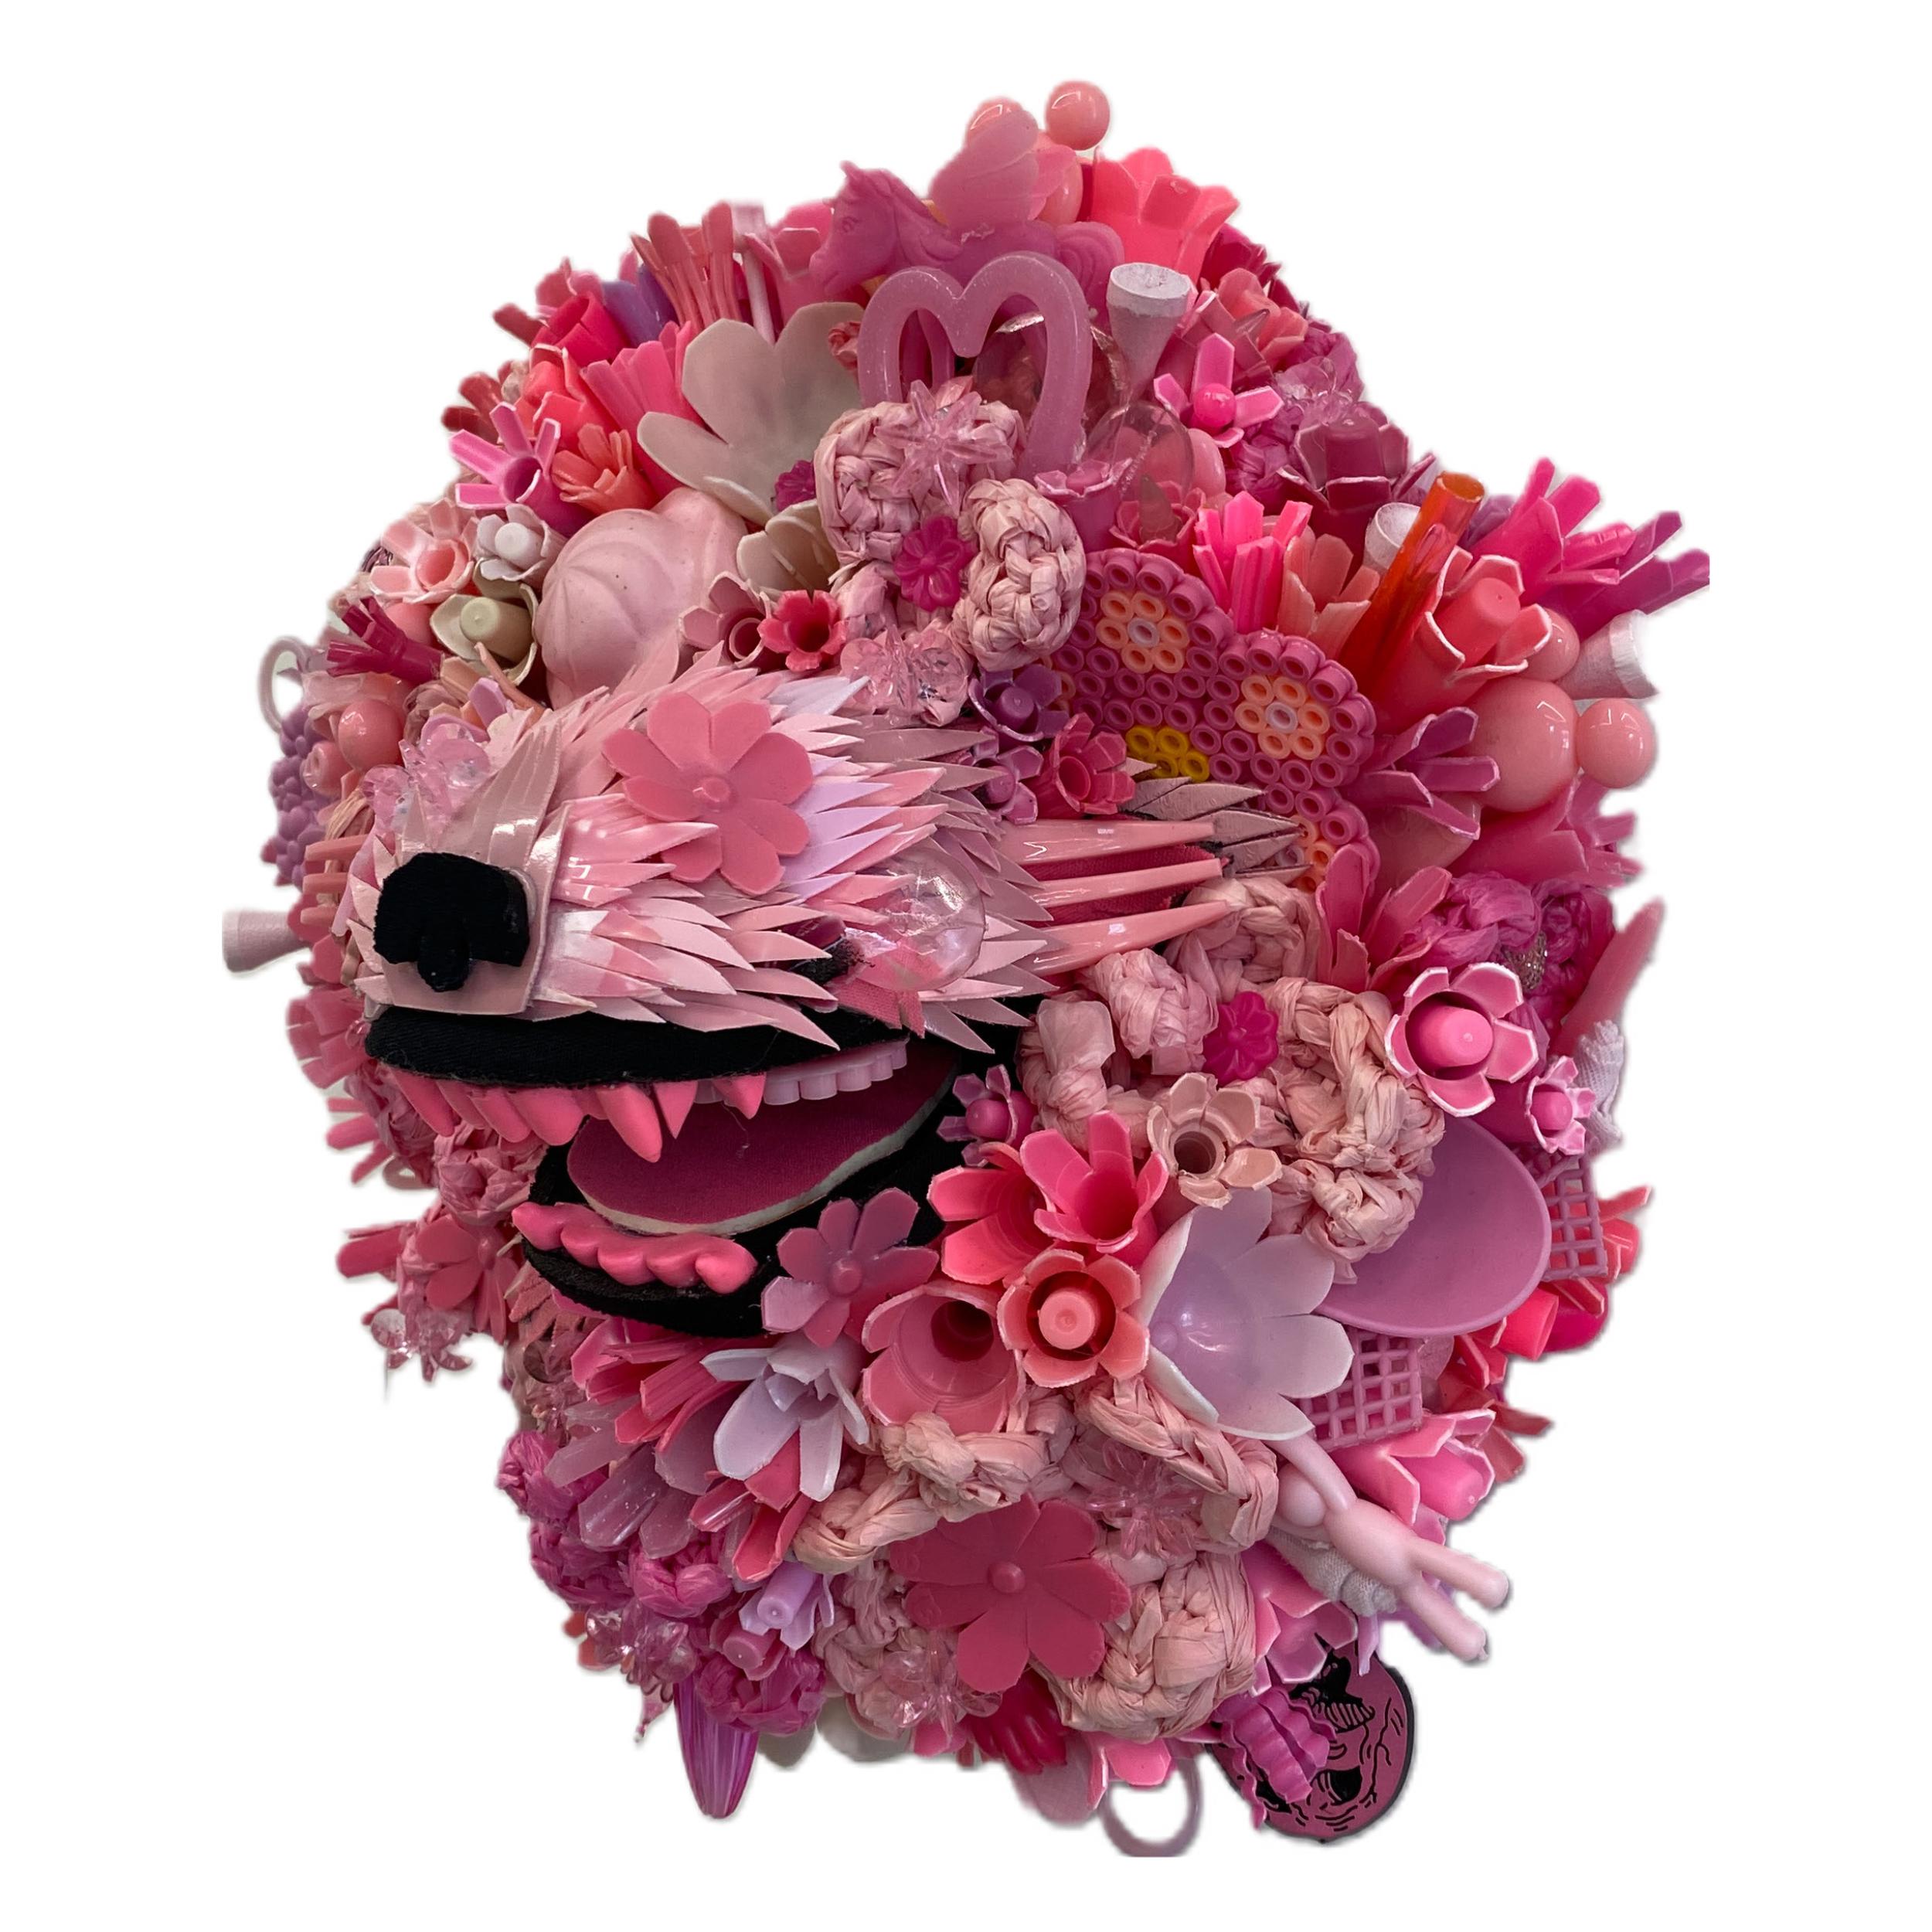 A 2021 sculpture by Calder Kamin, measuring  10 inches tall, 9 inches wide, and 6 inches deep. Hydrangea Hound IV is made up of recycled materials including plastic bags, koozies, caps, cutlery, plastic eggs, plastic containers, bottle caps, marker